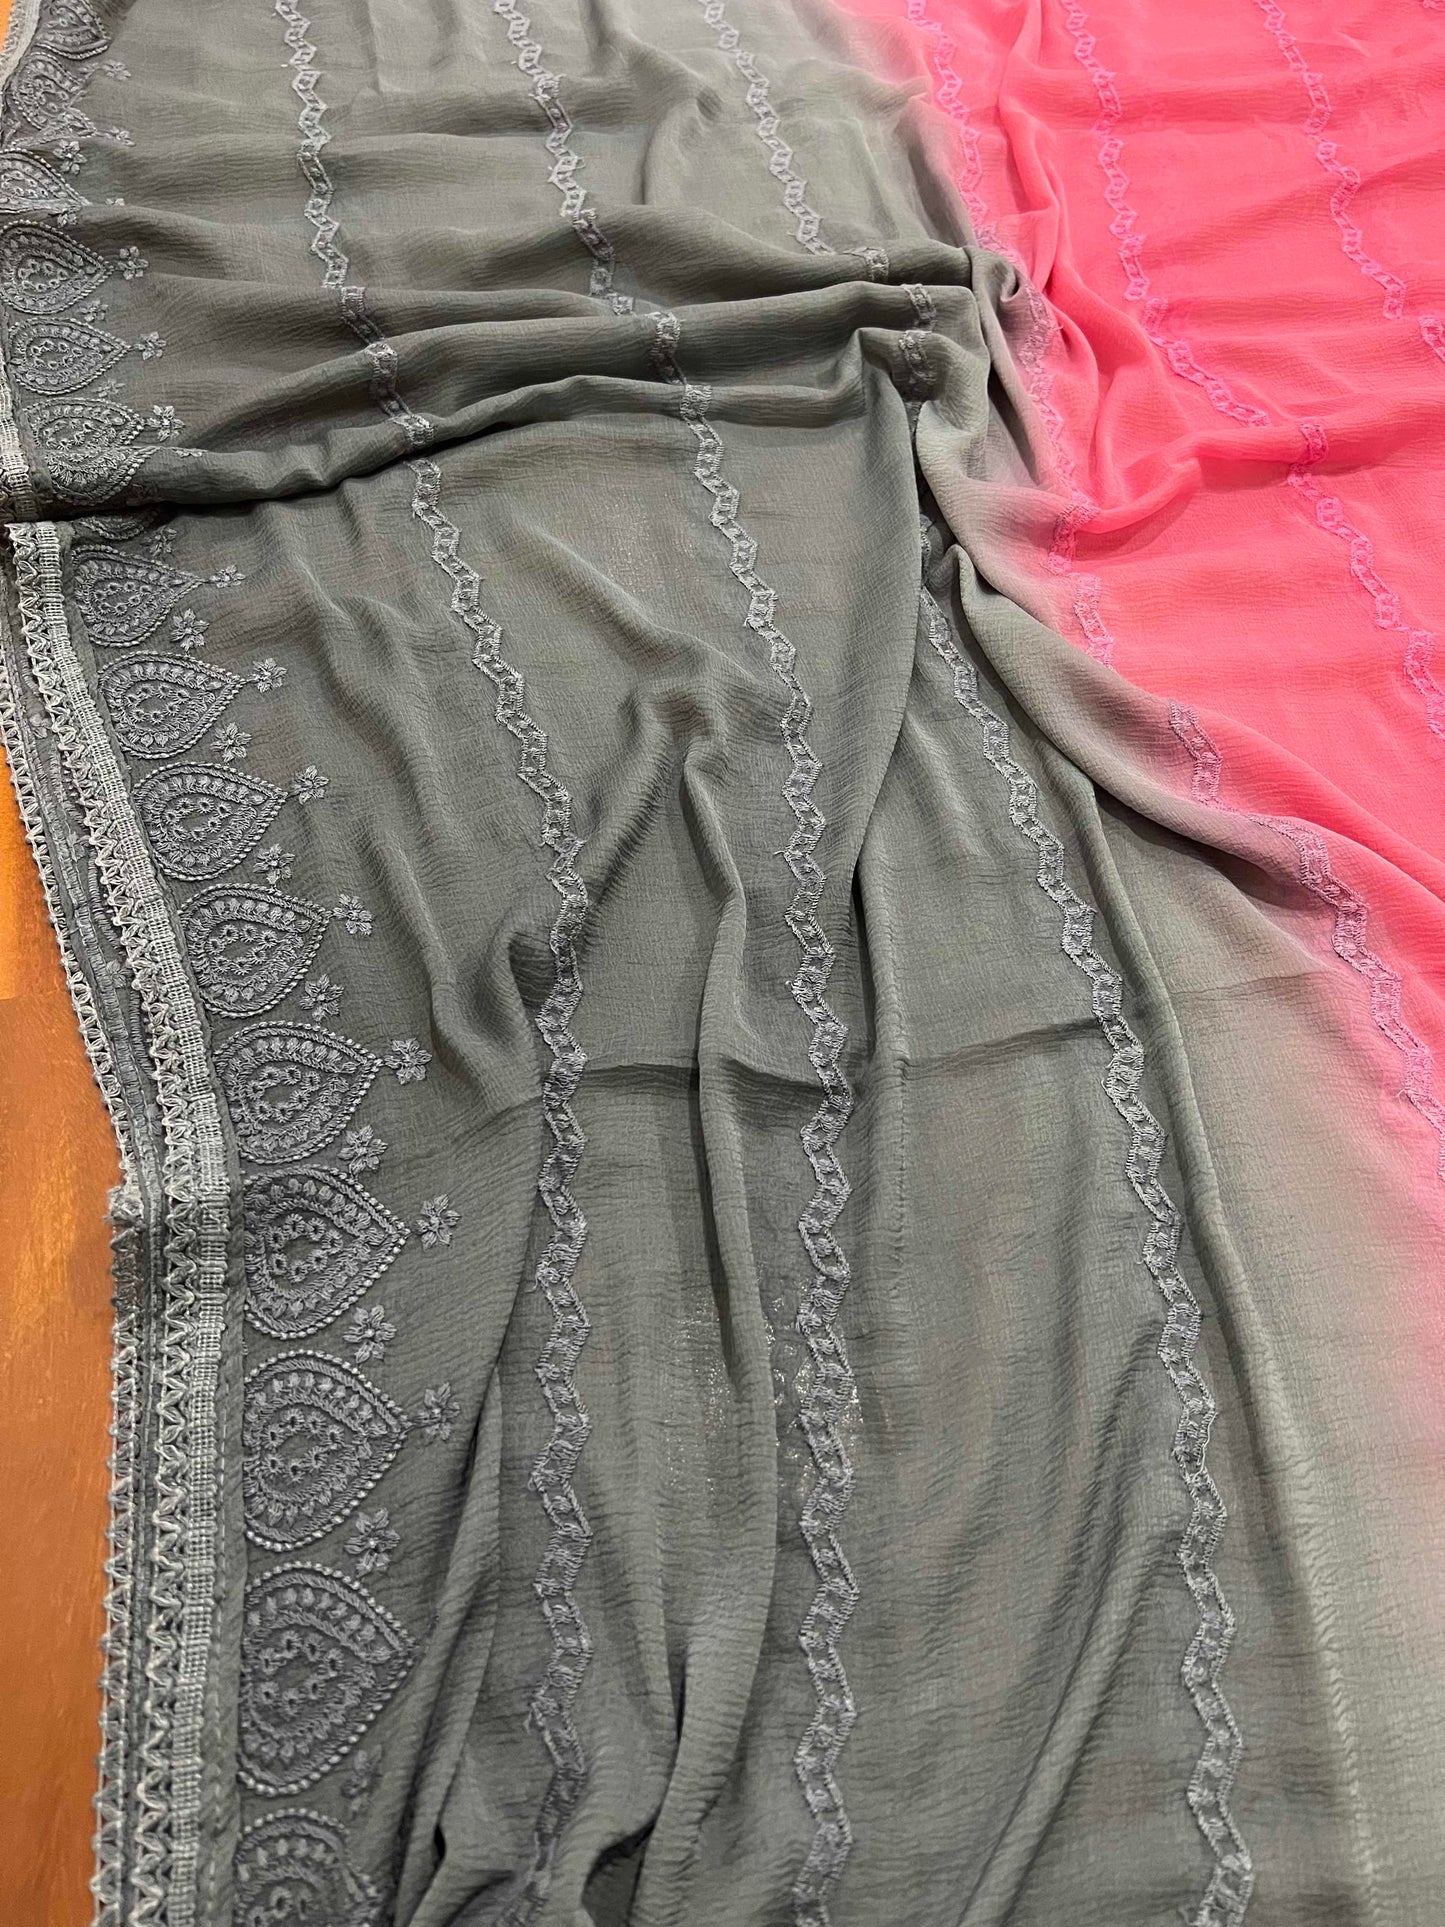 Southloom™ Semi Silk Churidar Salwar Suit Material in Peach and Grey with Embroidery Work